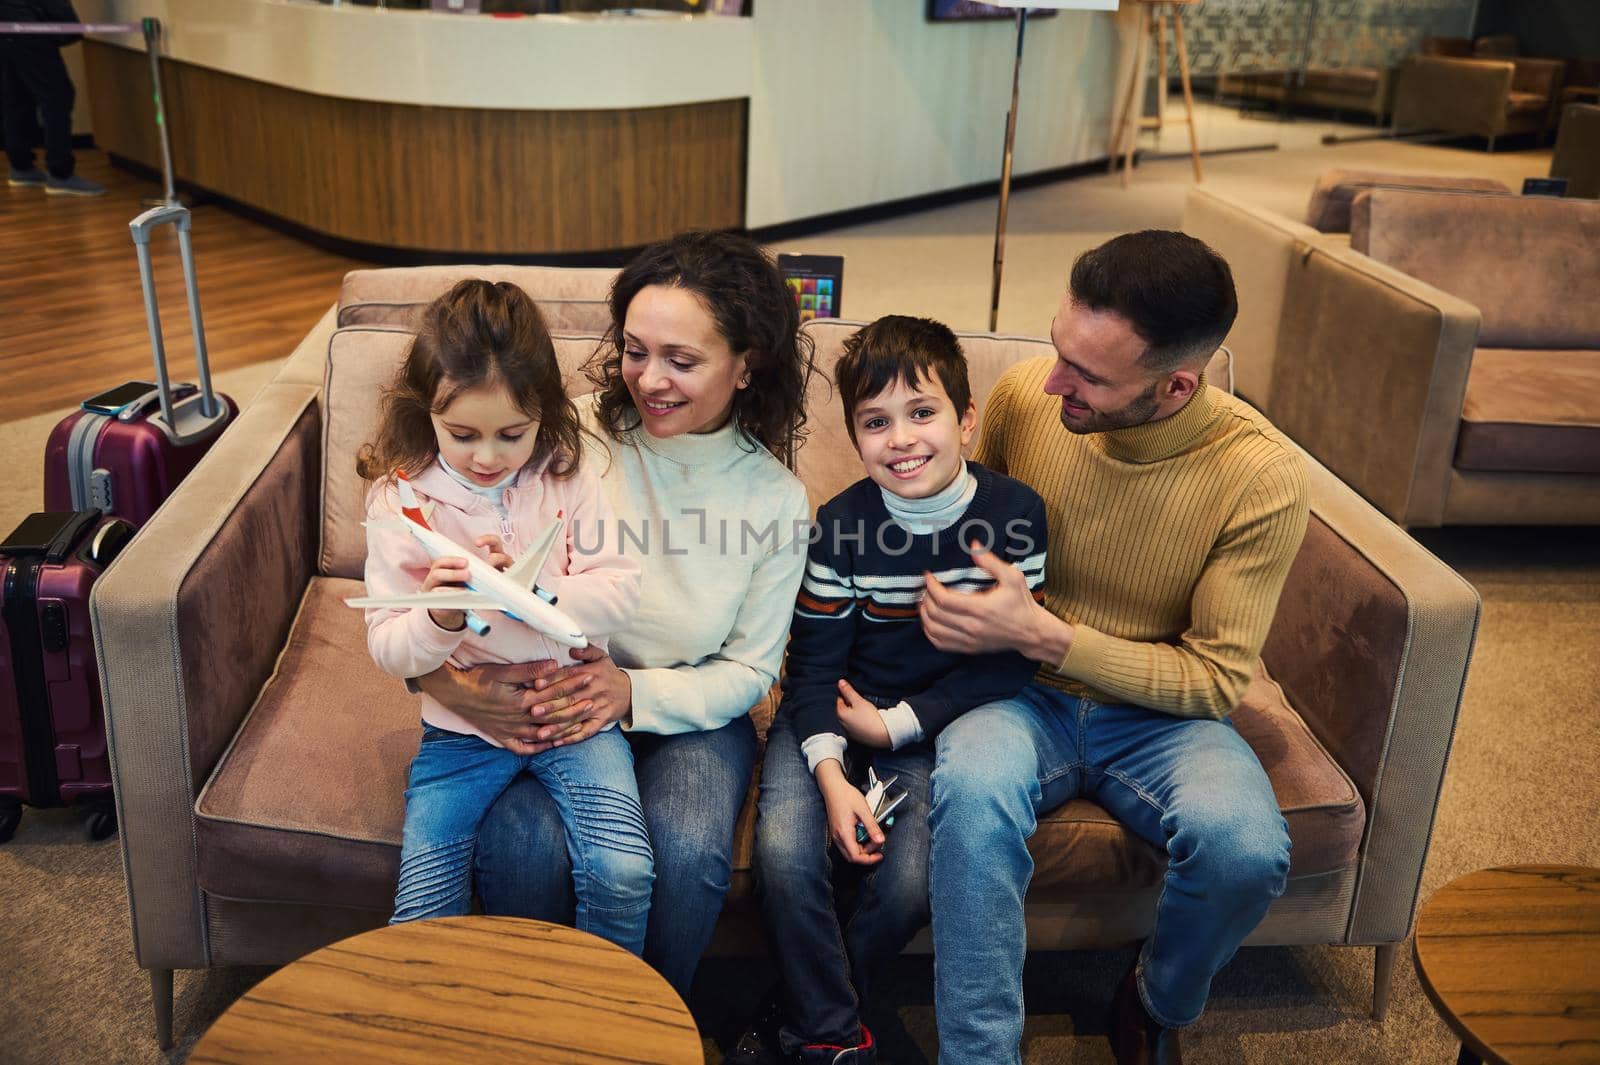 Overhead view of loving mom and dad tenderly hug their son and daughter playing with toy airplanes as they wait to board their flight in the VIP lounge of the international airport departure terminal.